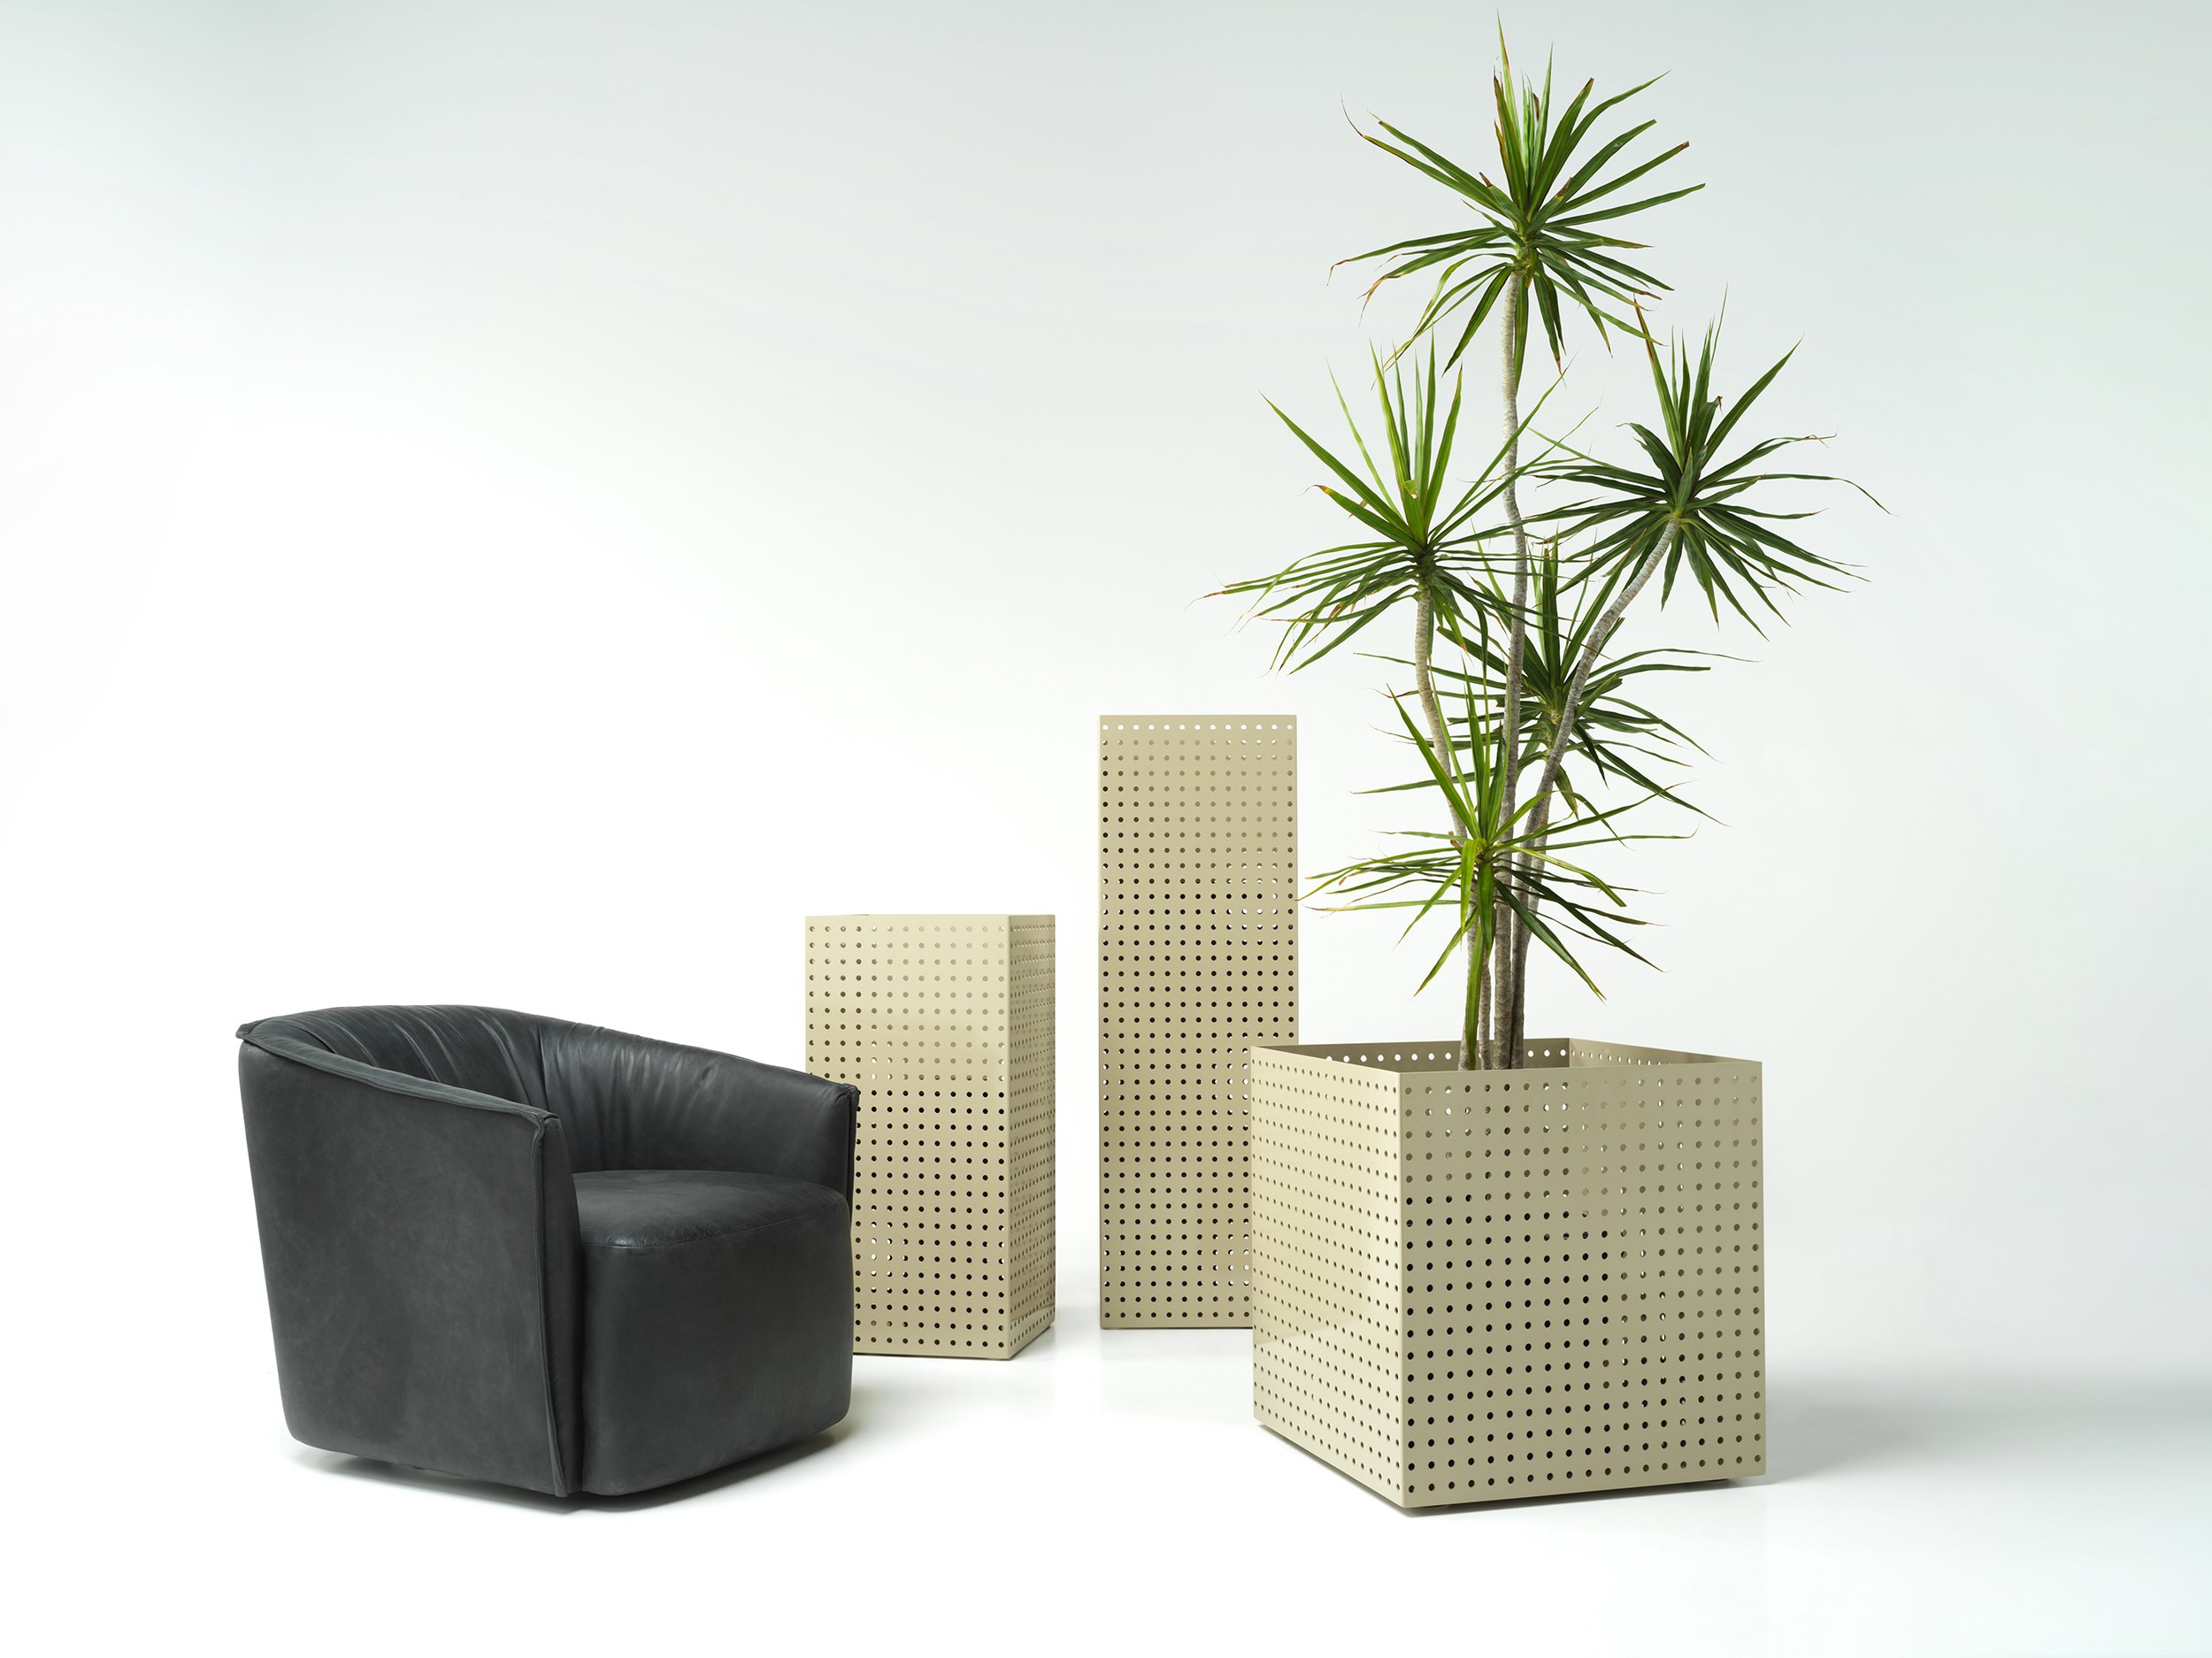 studiociao-ciao-b13-sbw-easychair-perforated-vessels-plants.jpg